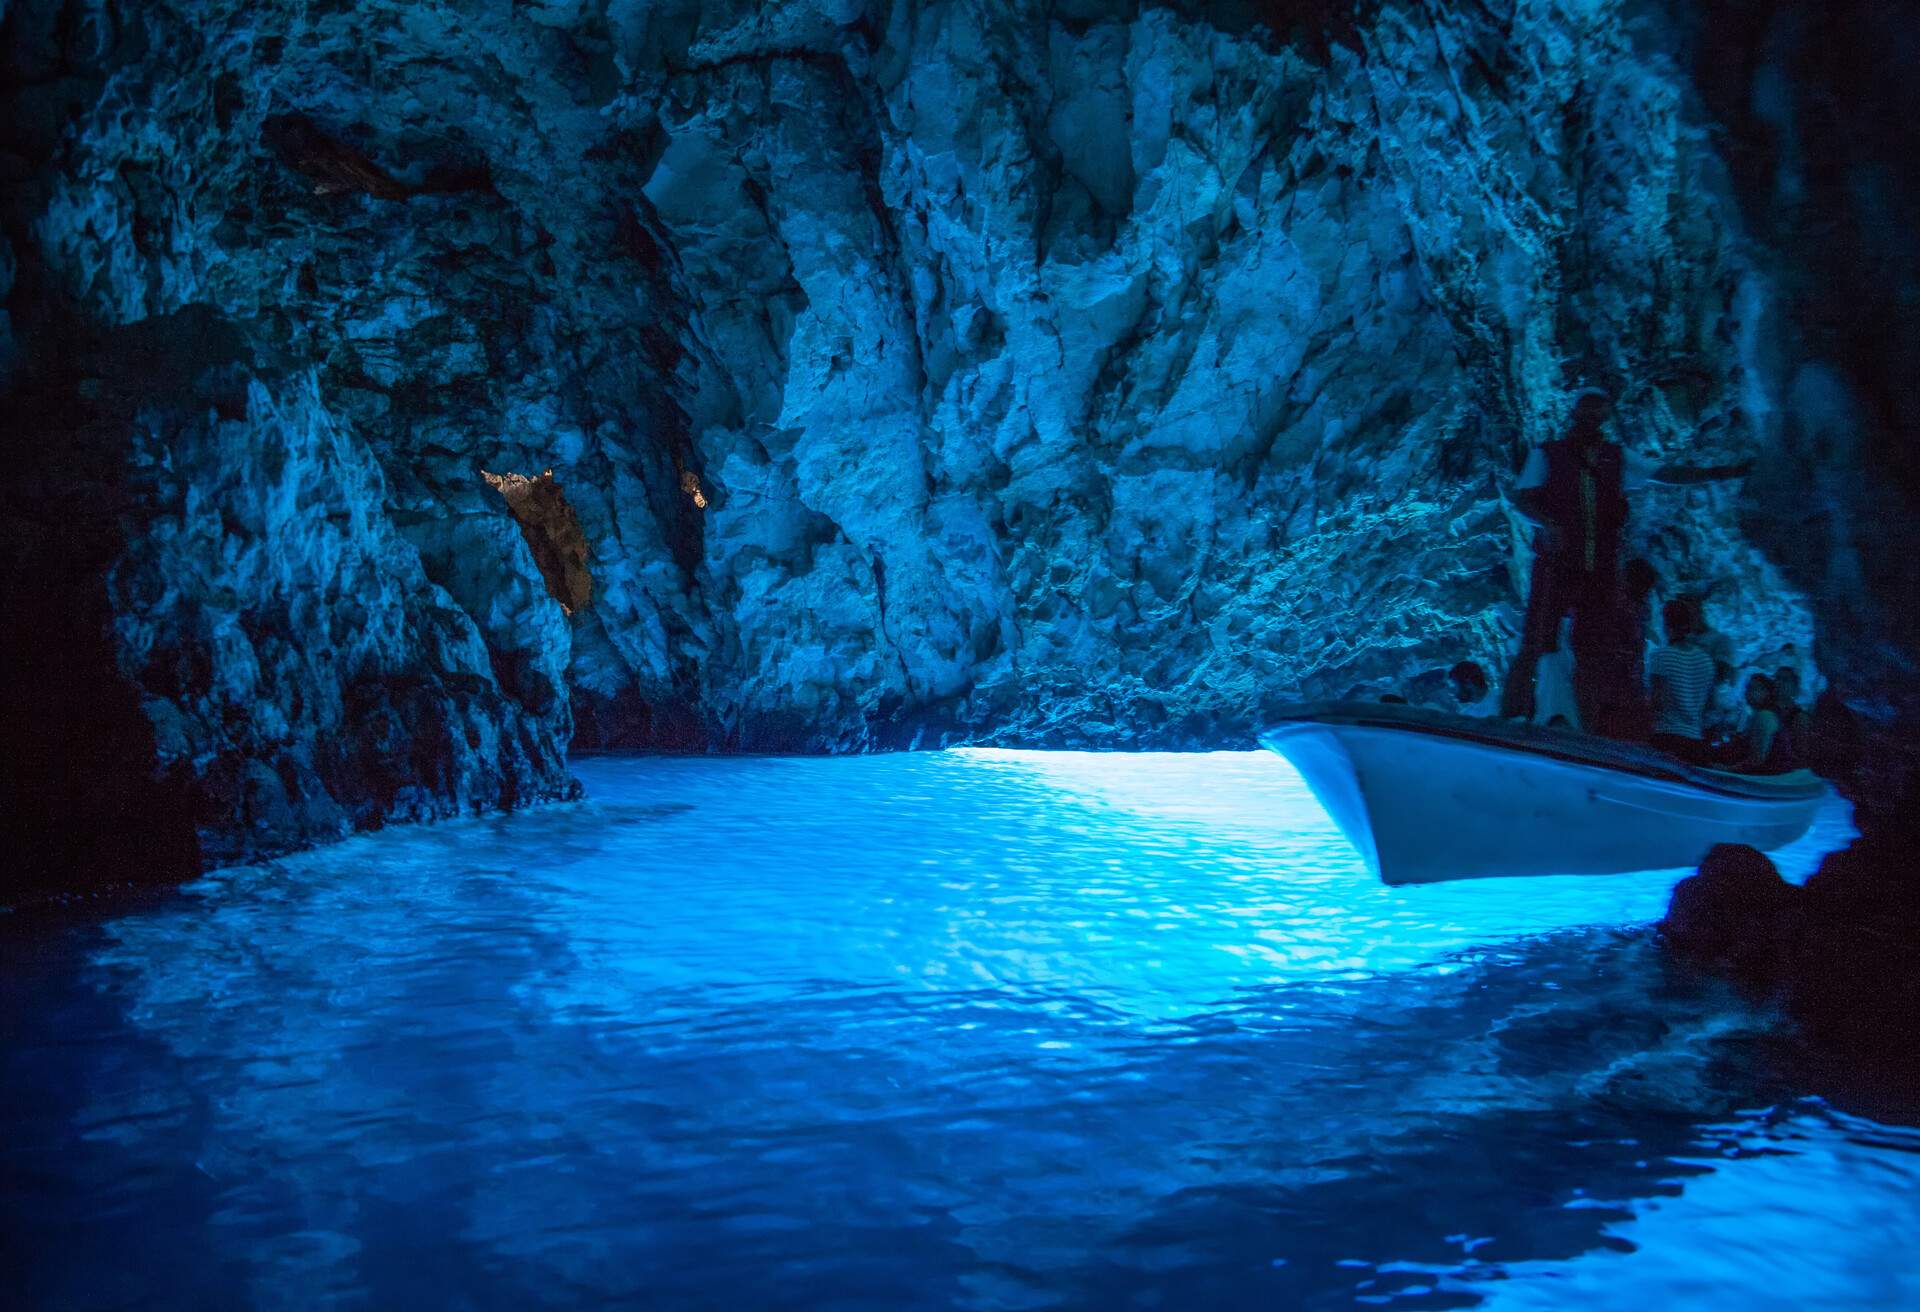 The Blue Cave, also known as the Blue Grotto (Modra špilja), is a stunning natural treasure located on the island Biševo, five kilometres south of Vis Island.